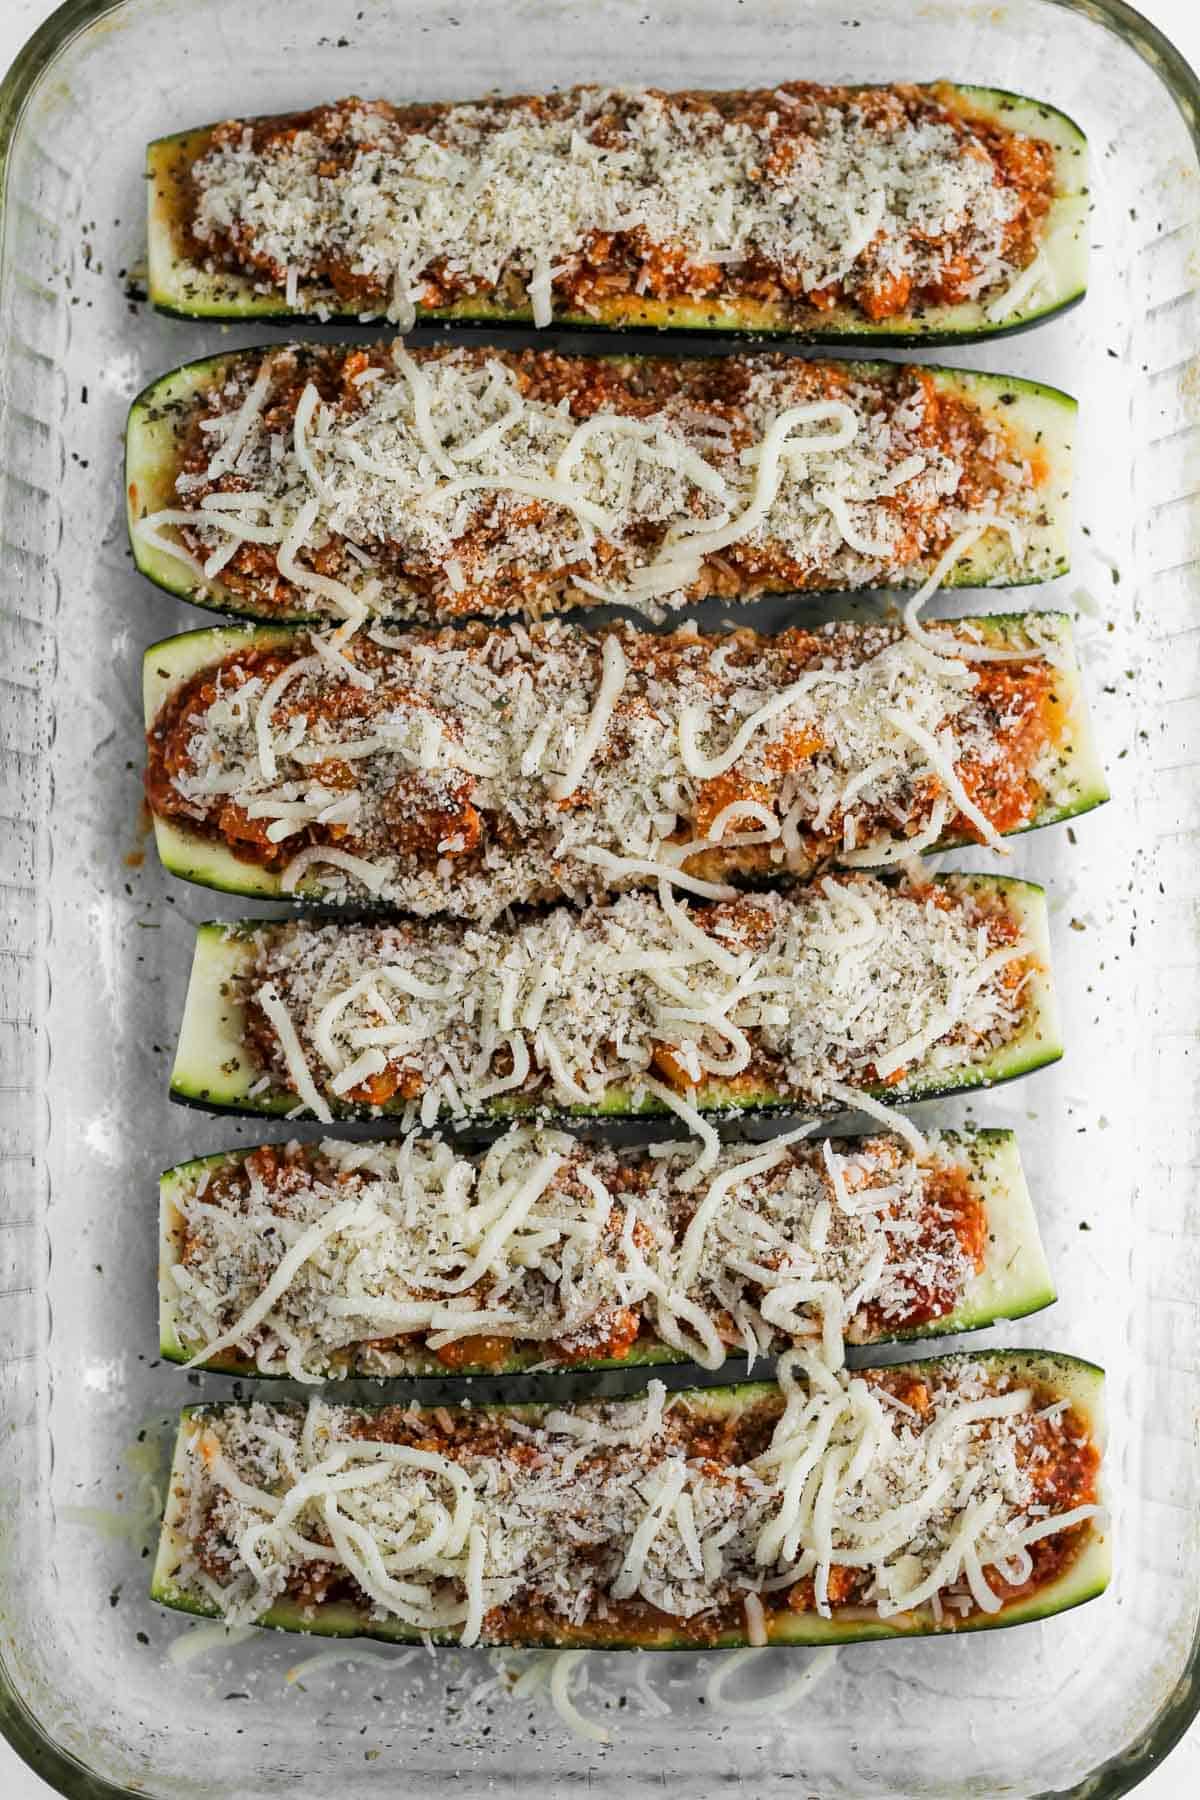 6 halved zucchini filled with italian filling and topped with parmesan cheese, mozzarella, and breadcrumbs.